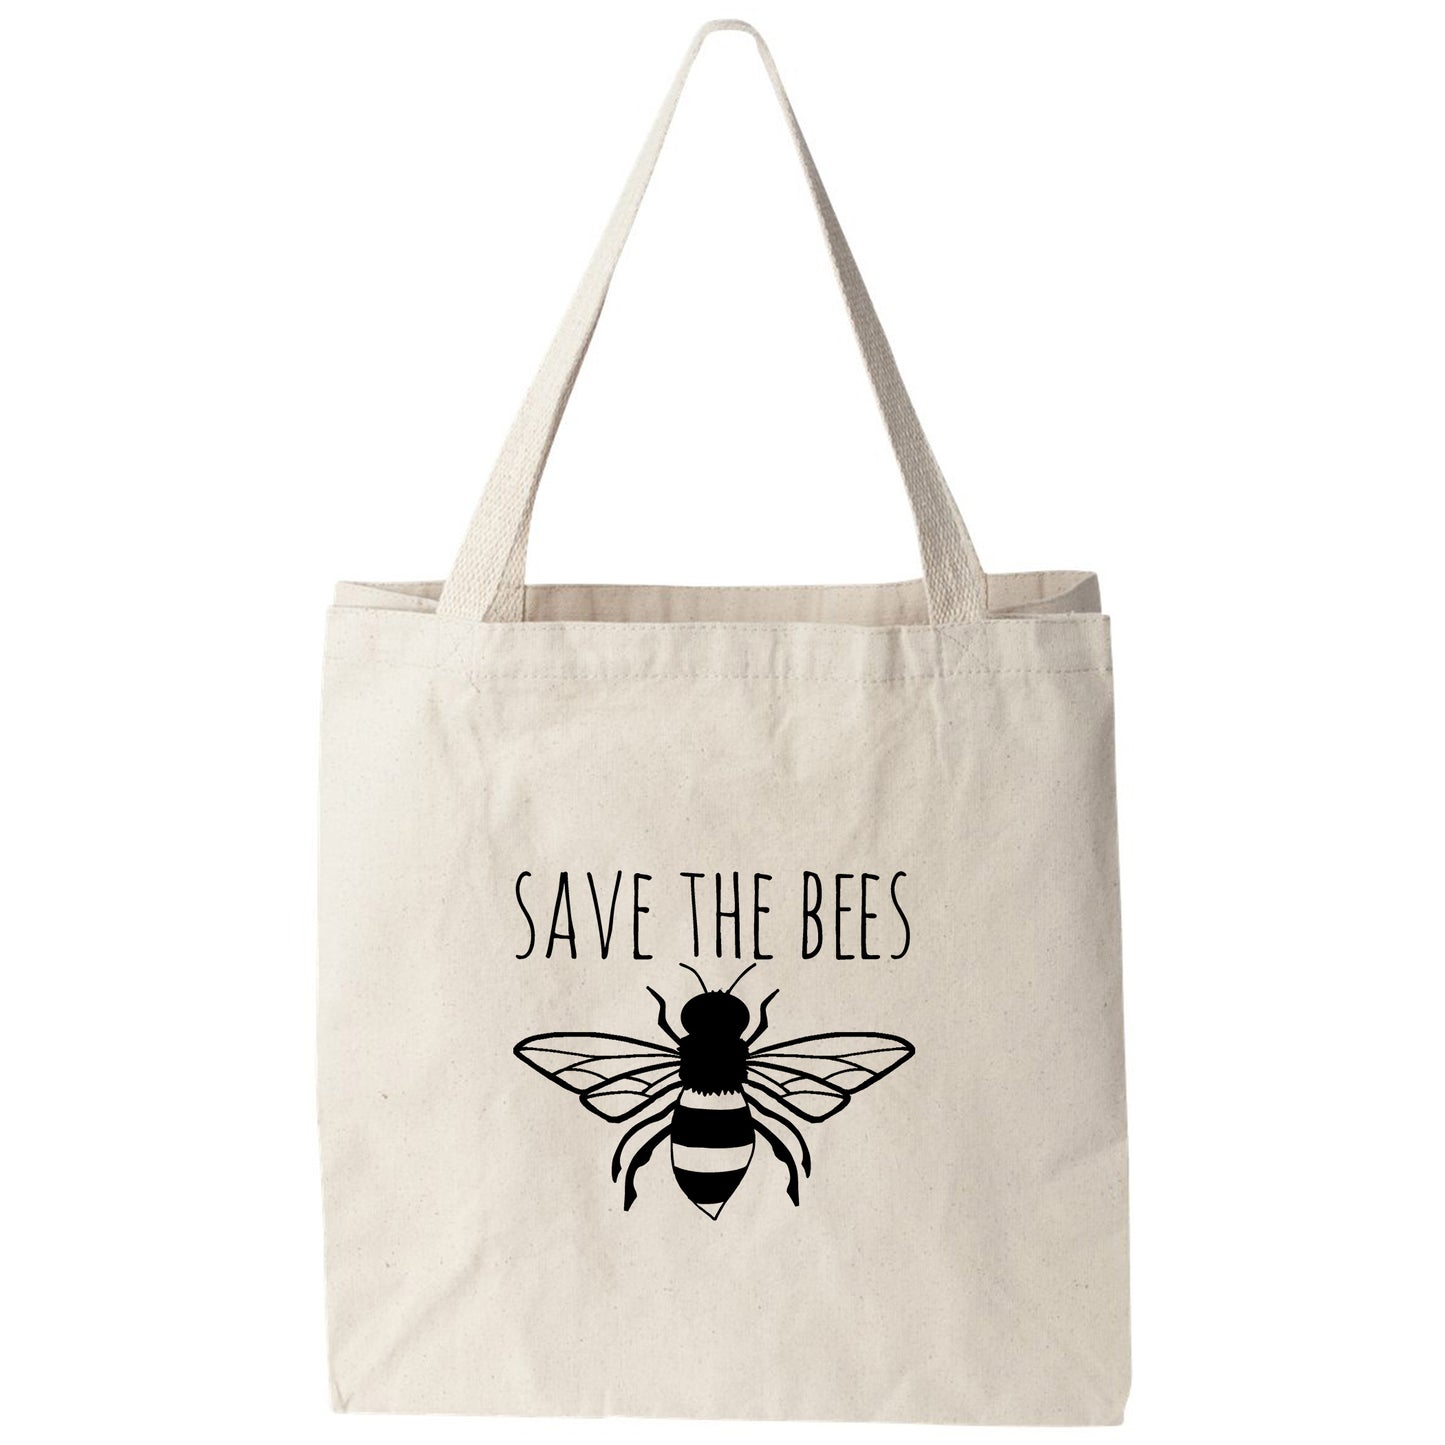 a tote bag that says save the bees